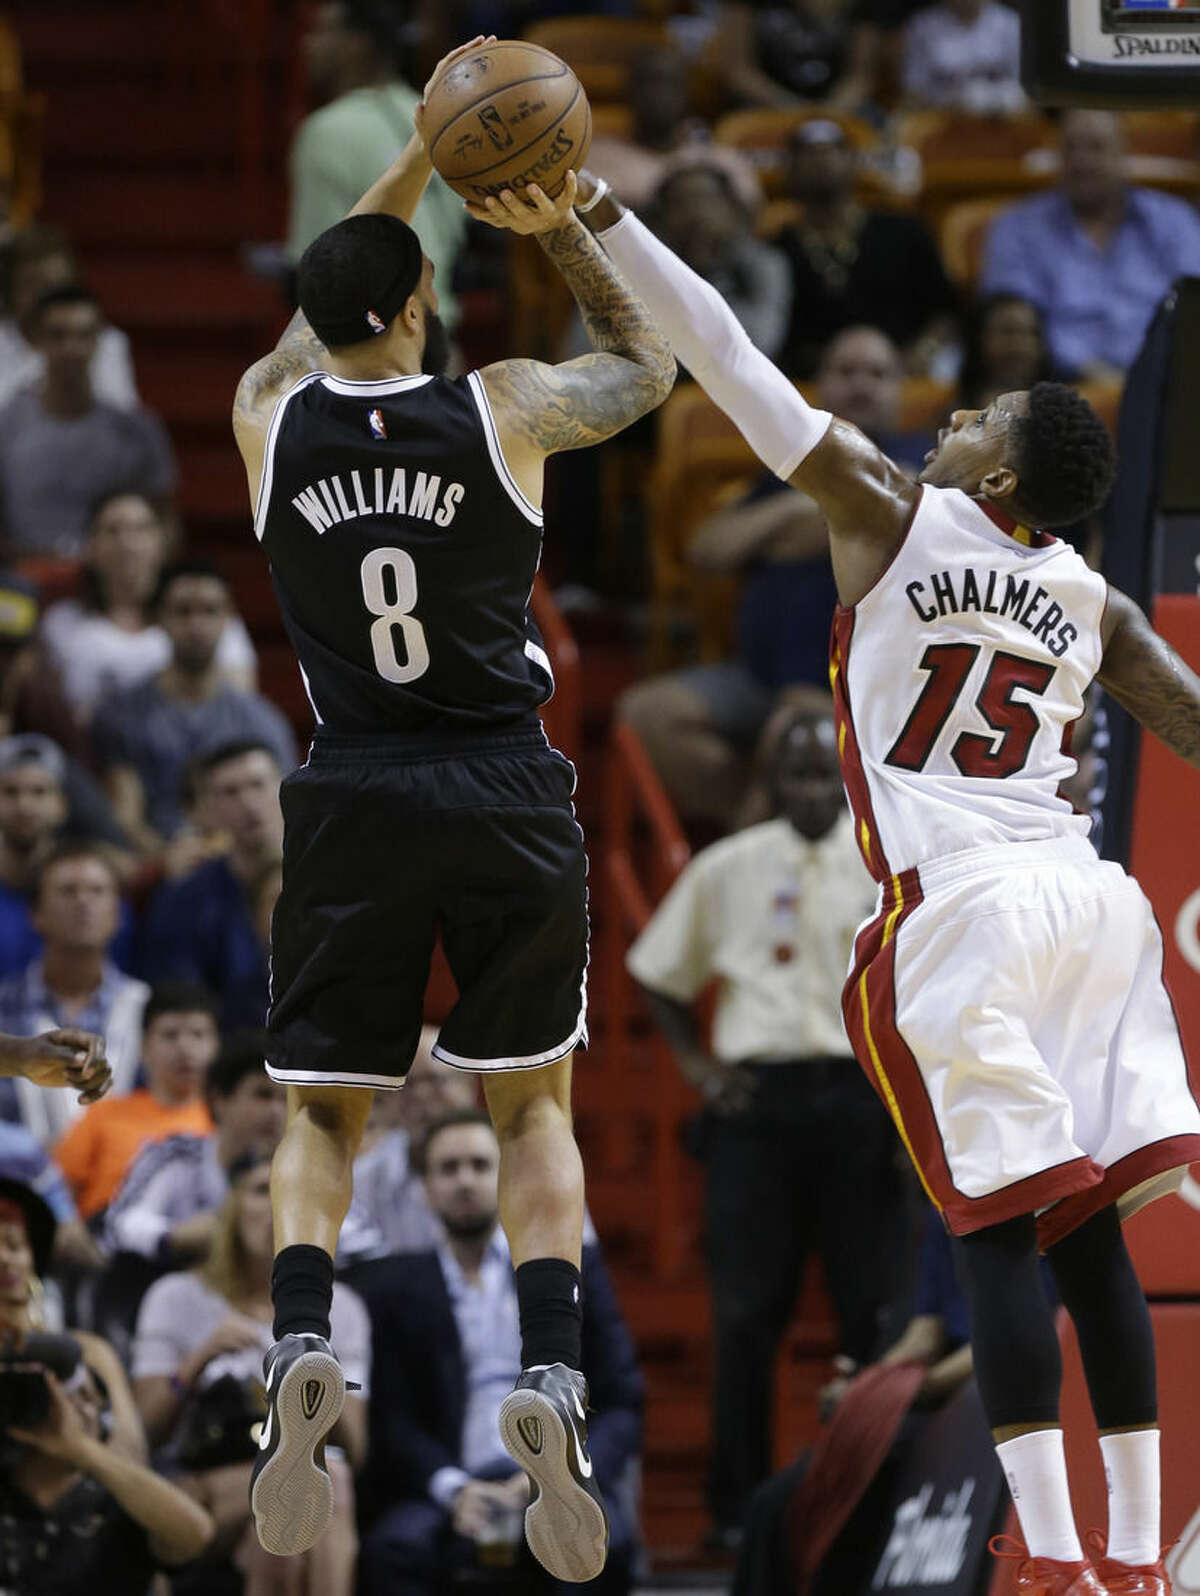 Brooklyn Nets guard Deron Williams (8) shoots over Miami Heat guard Mario Chalmers (15) during the first half of an NBA basketball game, Sunday, Jan. 4, 2015, in Miami. (AP Photo/Lynne Sladky)